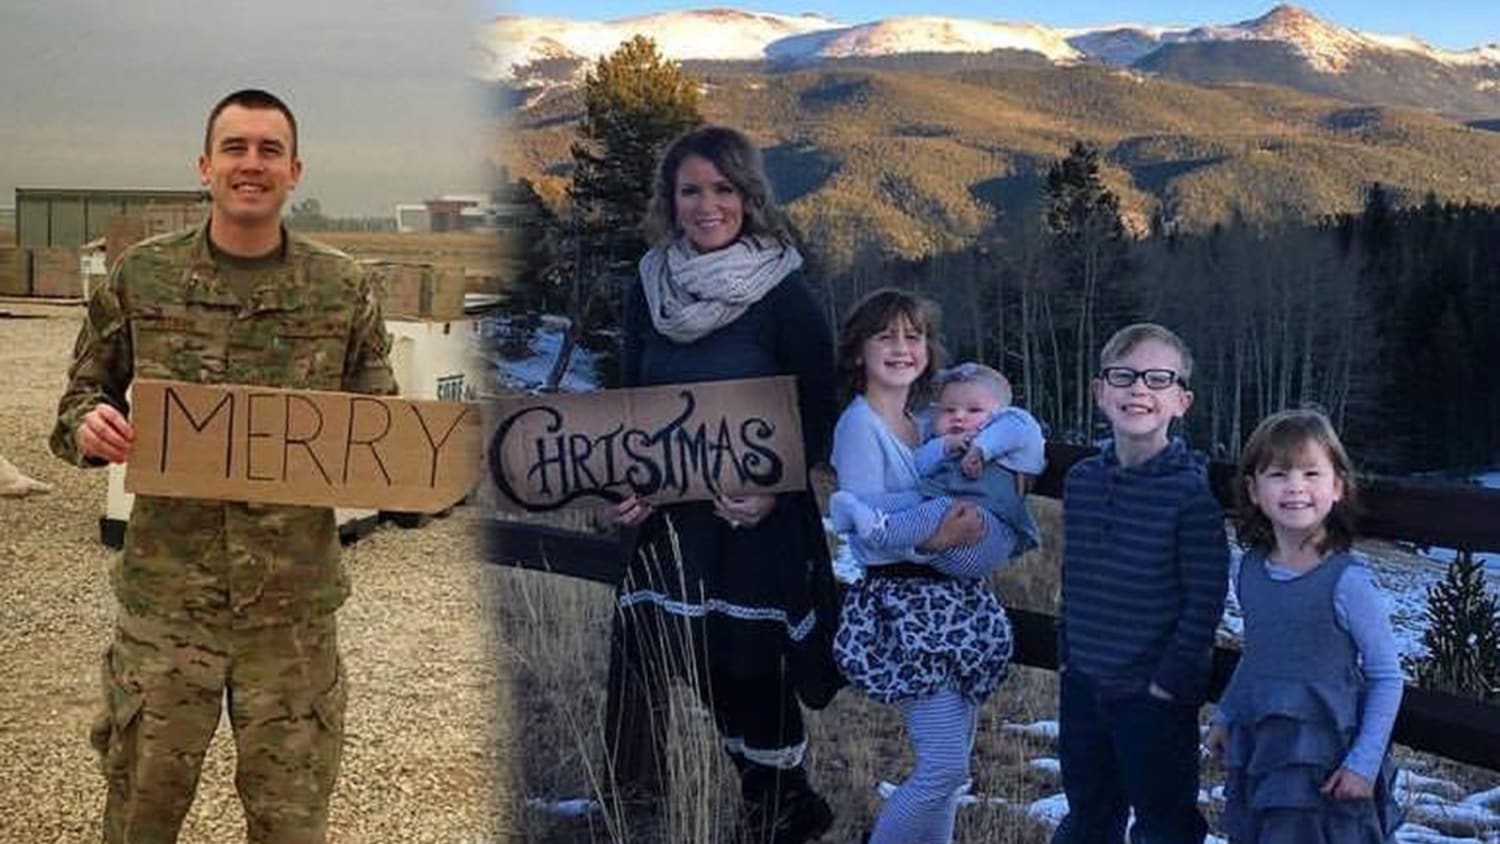 Military wife includes deployed husband in family Christmas photo